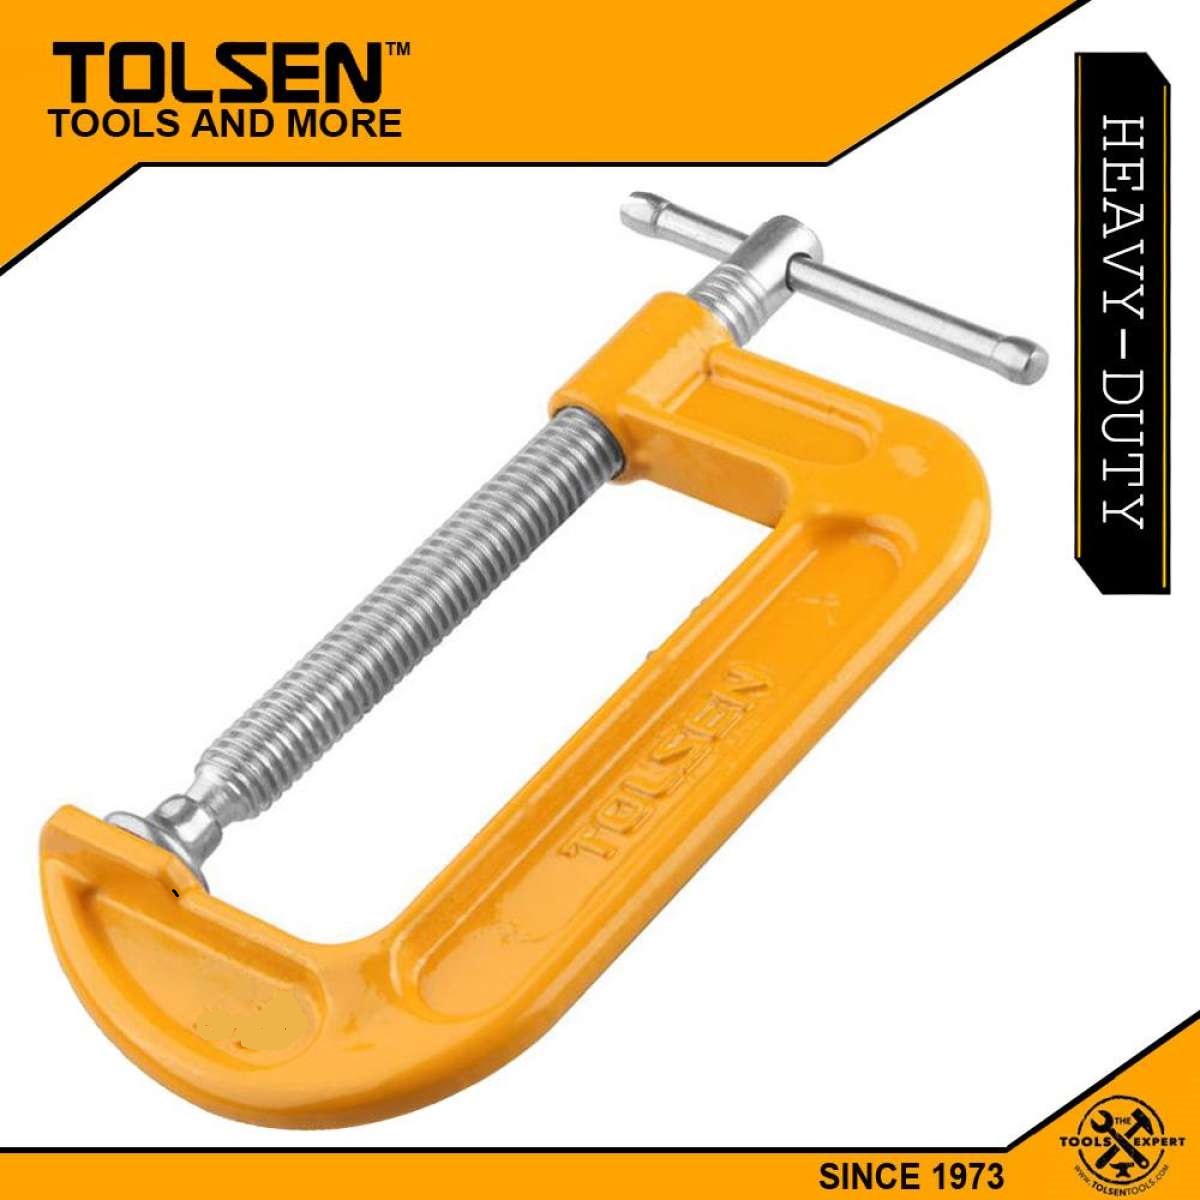 6" C-CLAMP by TOLSEN